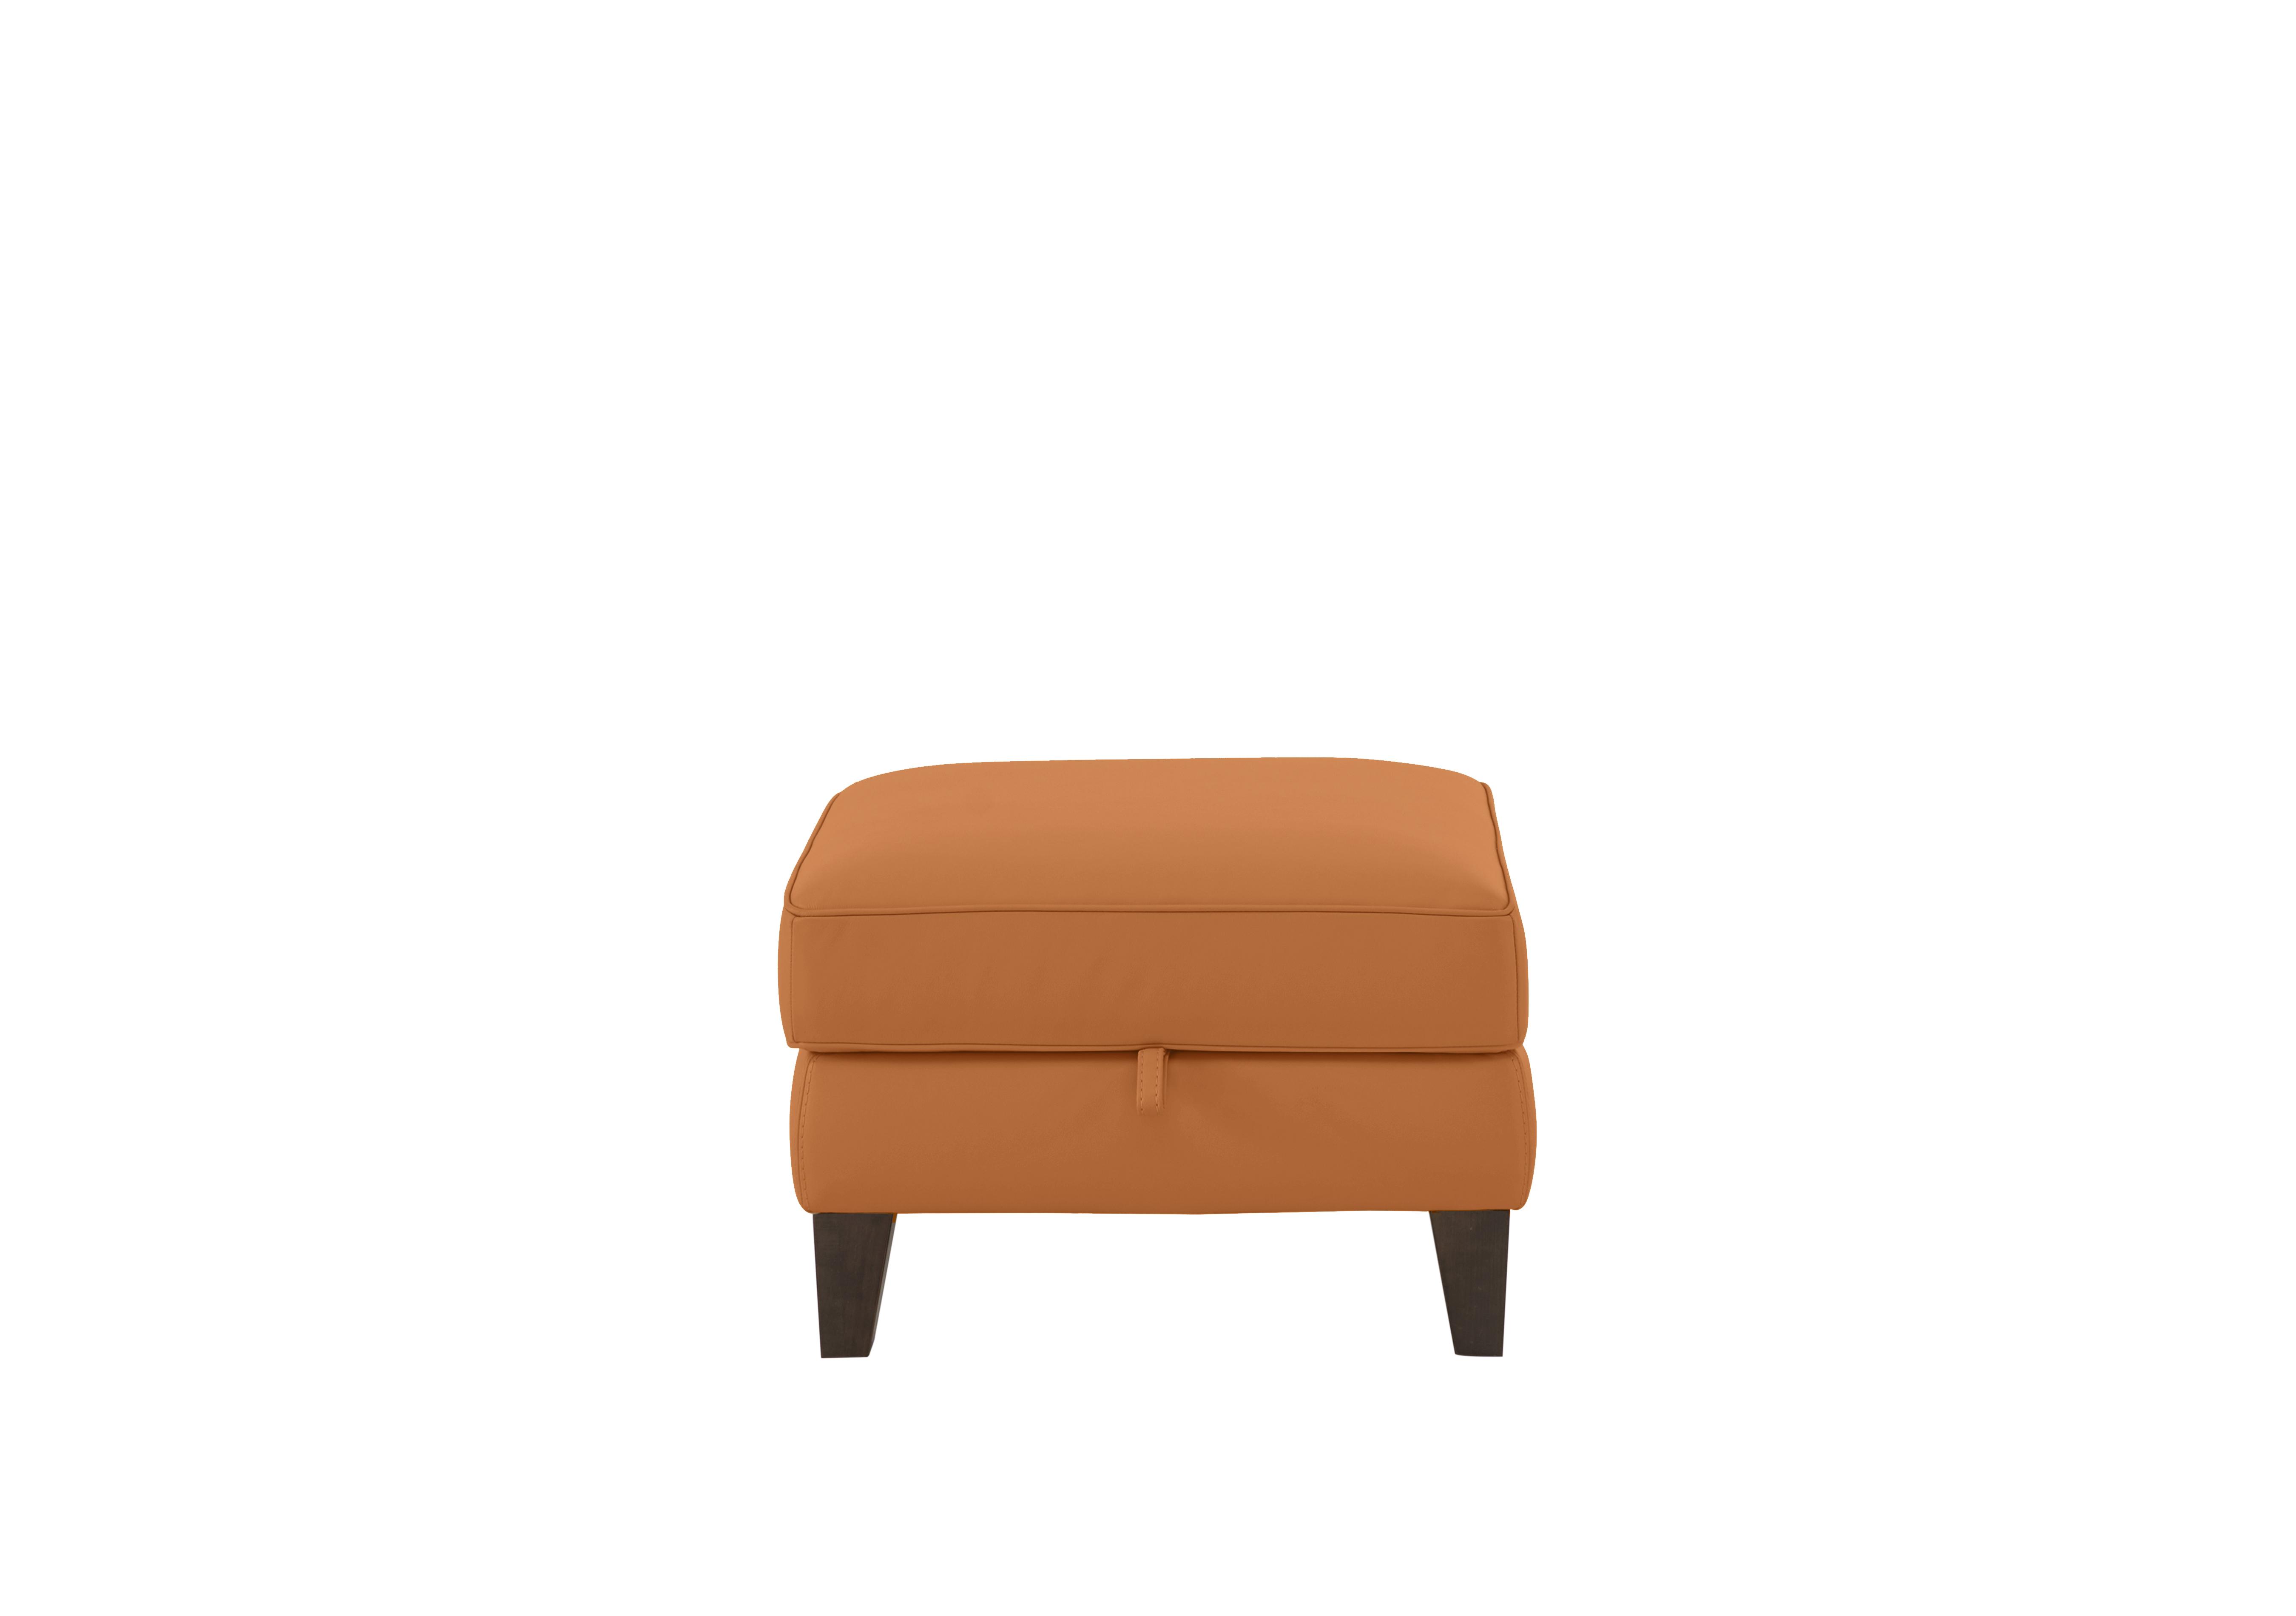 Brondby Leather Storage Footstool in Bv-335e Honey Yellow on Furniture Village